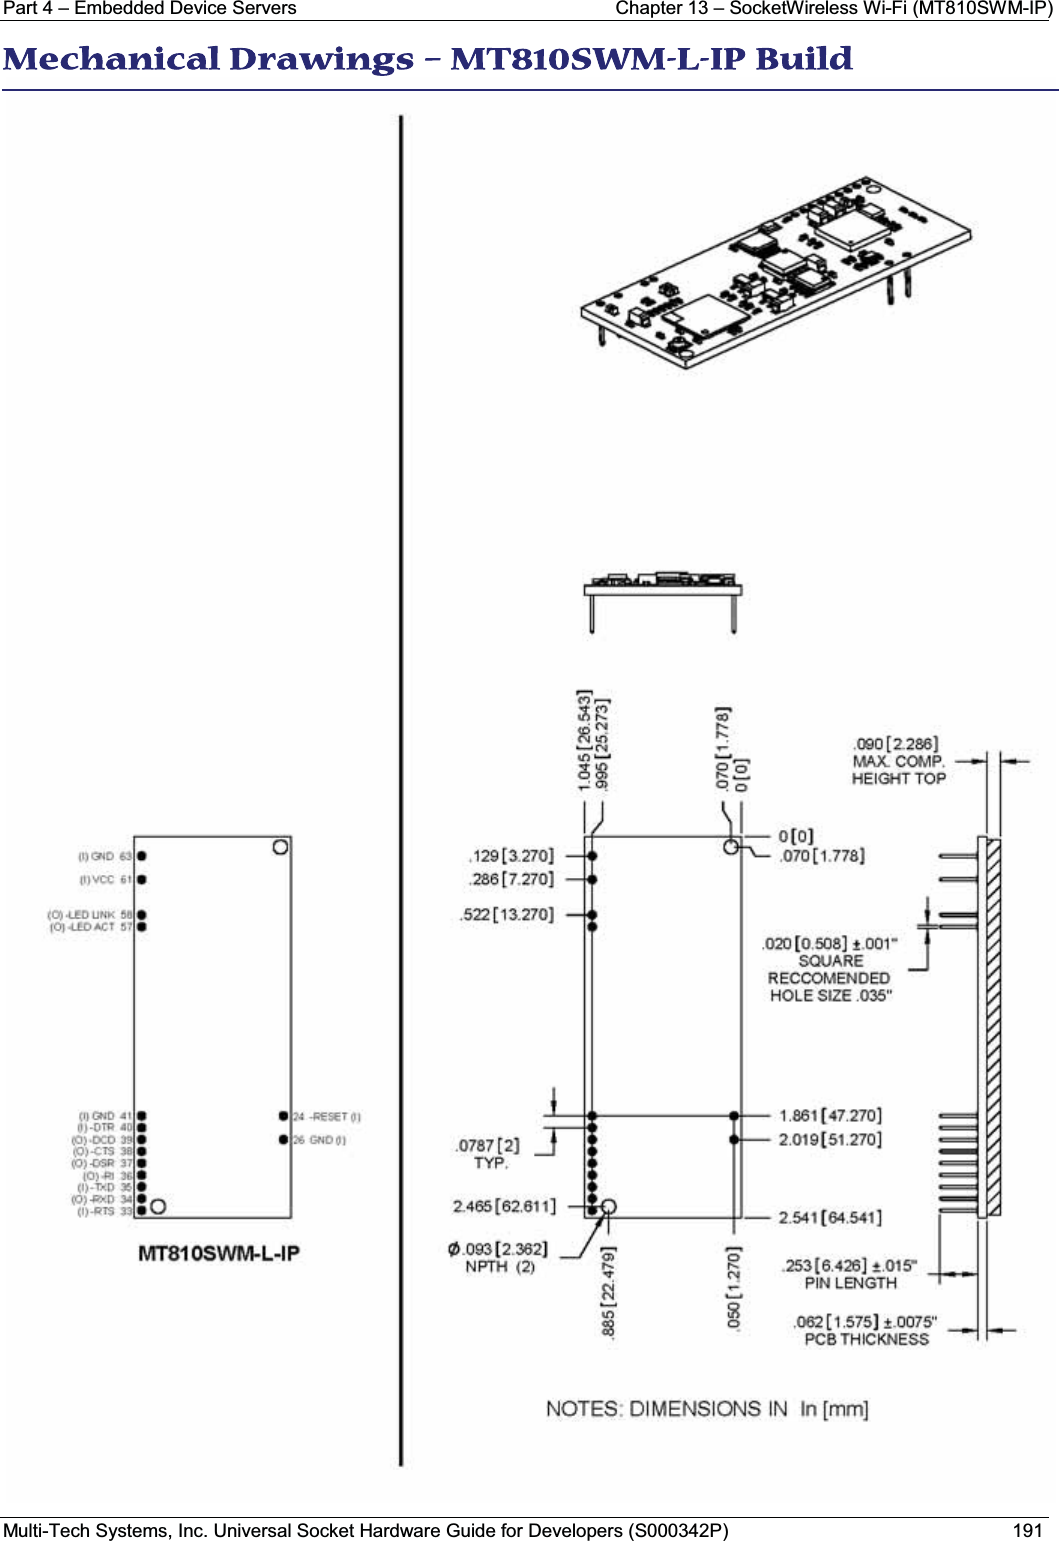 Part 4 – Embedded Device Servers Chapter 13 – SocketWireless Wi-Fi (MT810SWM-IP)Multi-Tech Systems, Inc. Universal Socket Hardware Guide for Developers (S000342P) 191MMechanical Drawings – MT810SWM-L-IP Build 